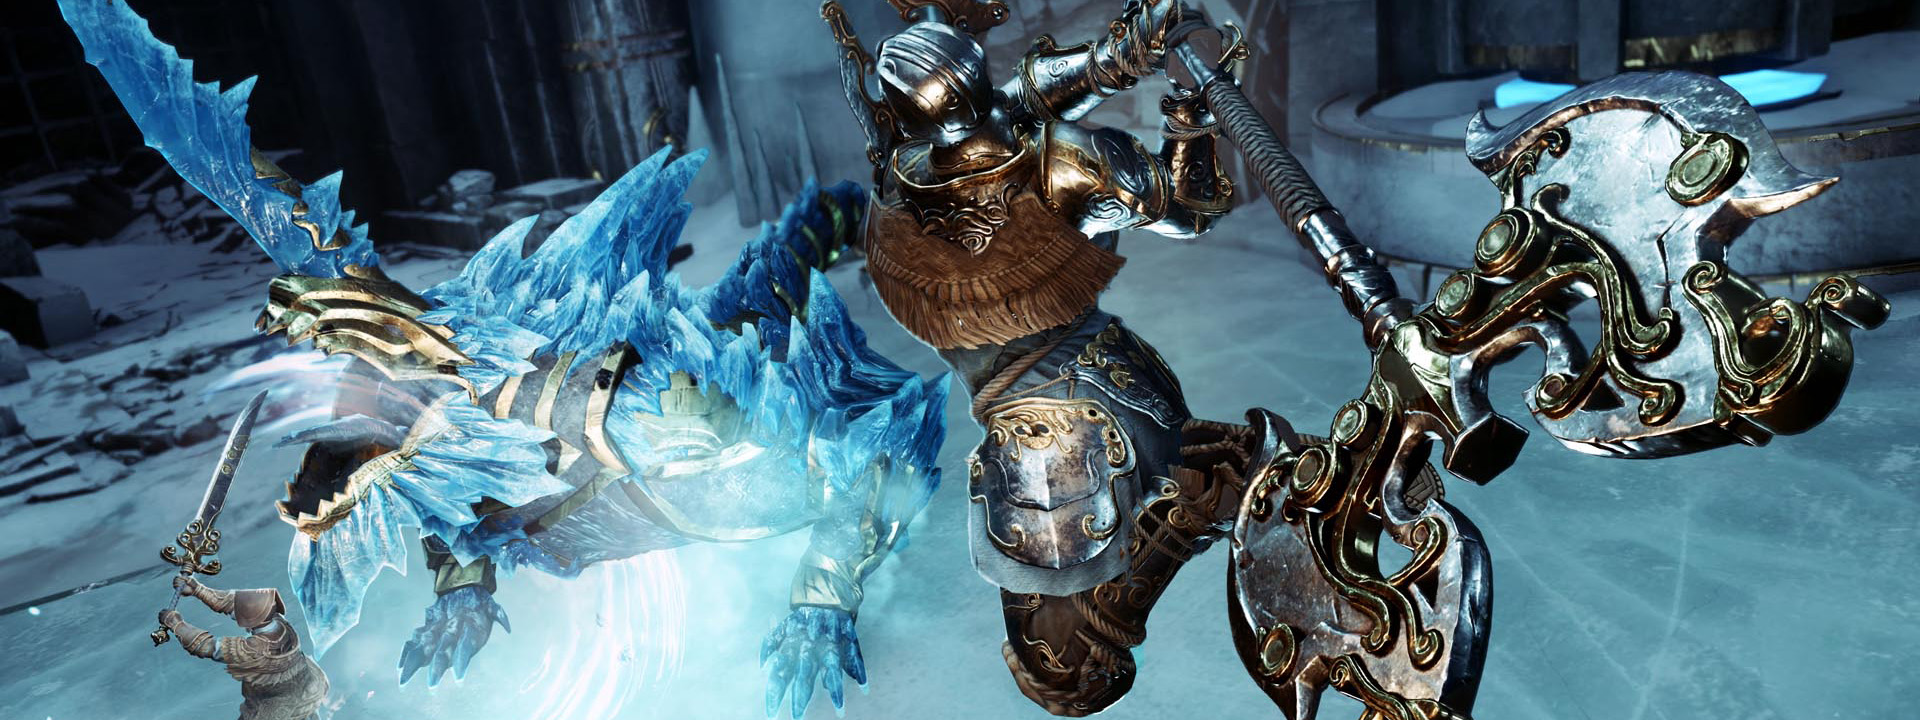 Winter Rune Forge Icey Construct boss fight